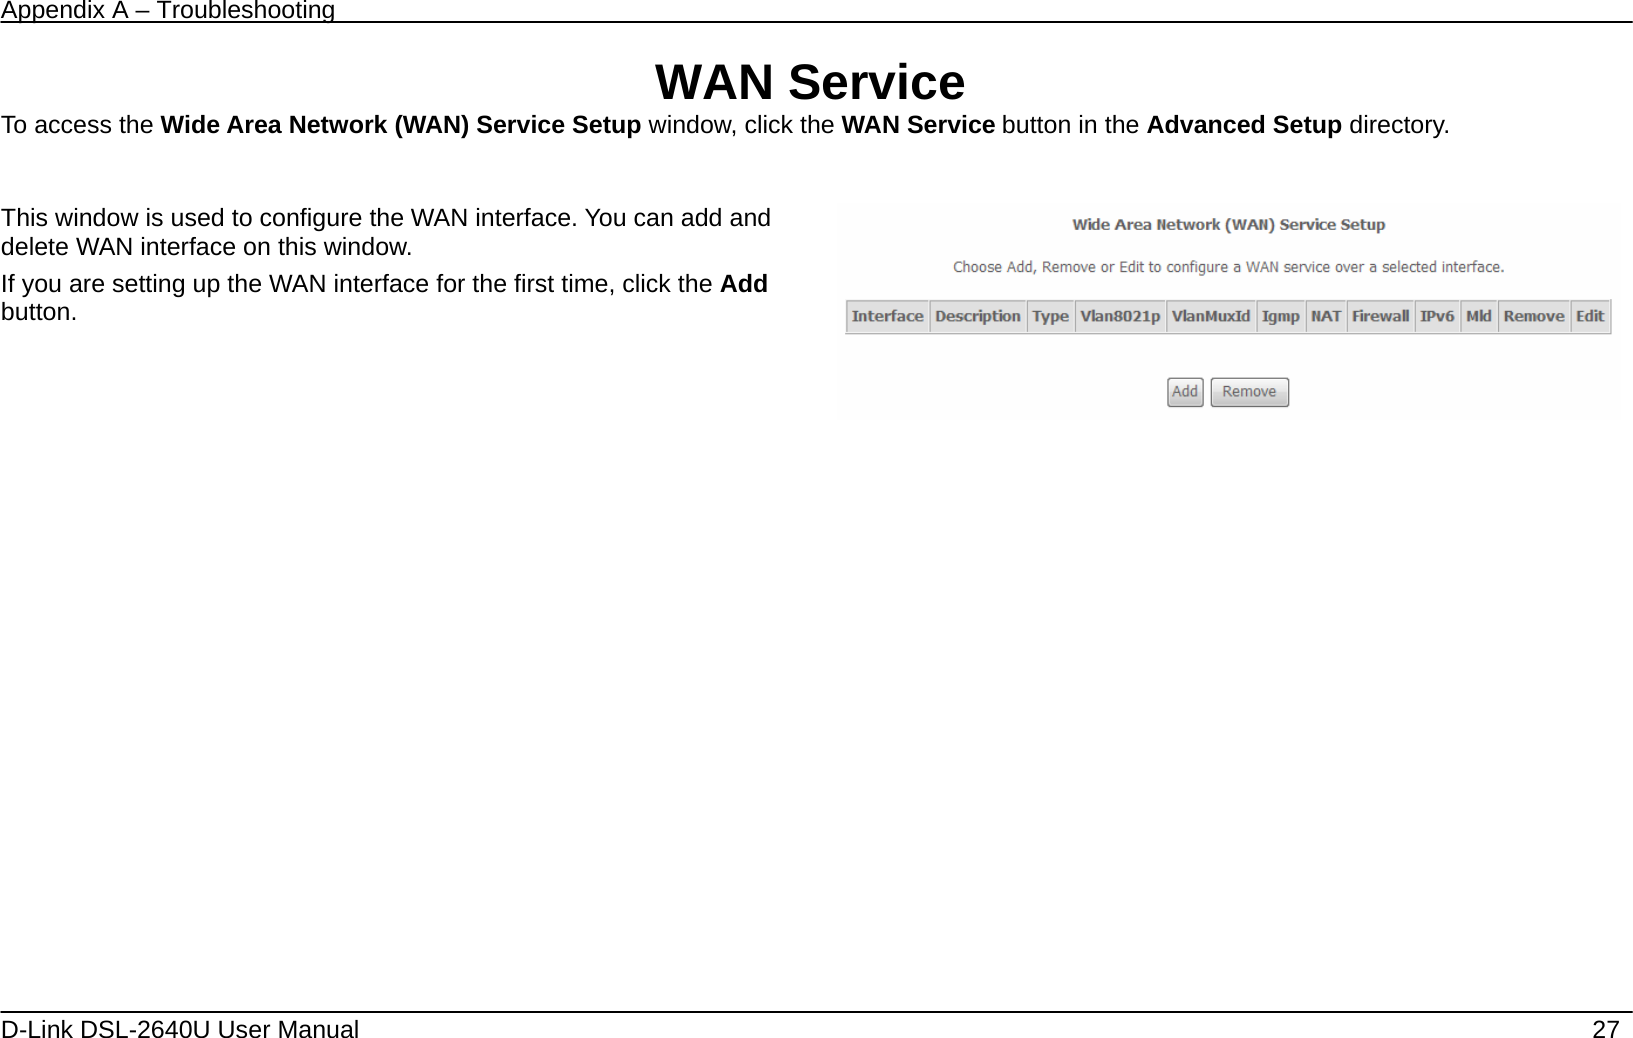 Appendix A – Troubleshooting   D-Link DSL-2640U User Manual    27 WAN Service To access the Wide Area Network (WAN) Service Setup window, click the WAN Service button in the Advanced Setup directory.  This window is used to configure the WAN interface. You can add and delete WAN interface on this window.   If you are setting up the WAN interface for the first time, click the Add button.                